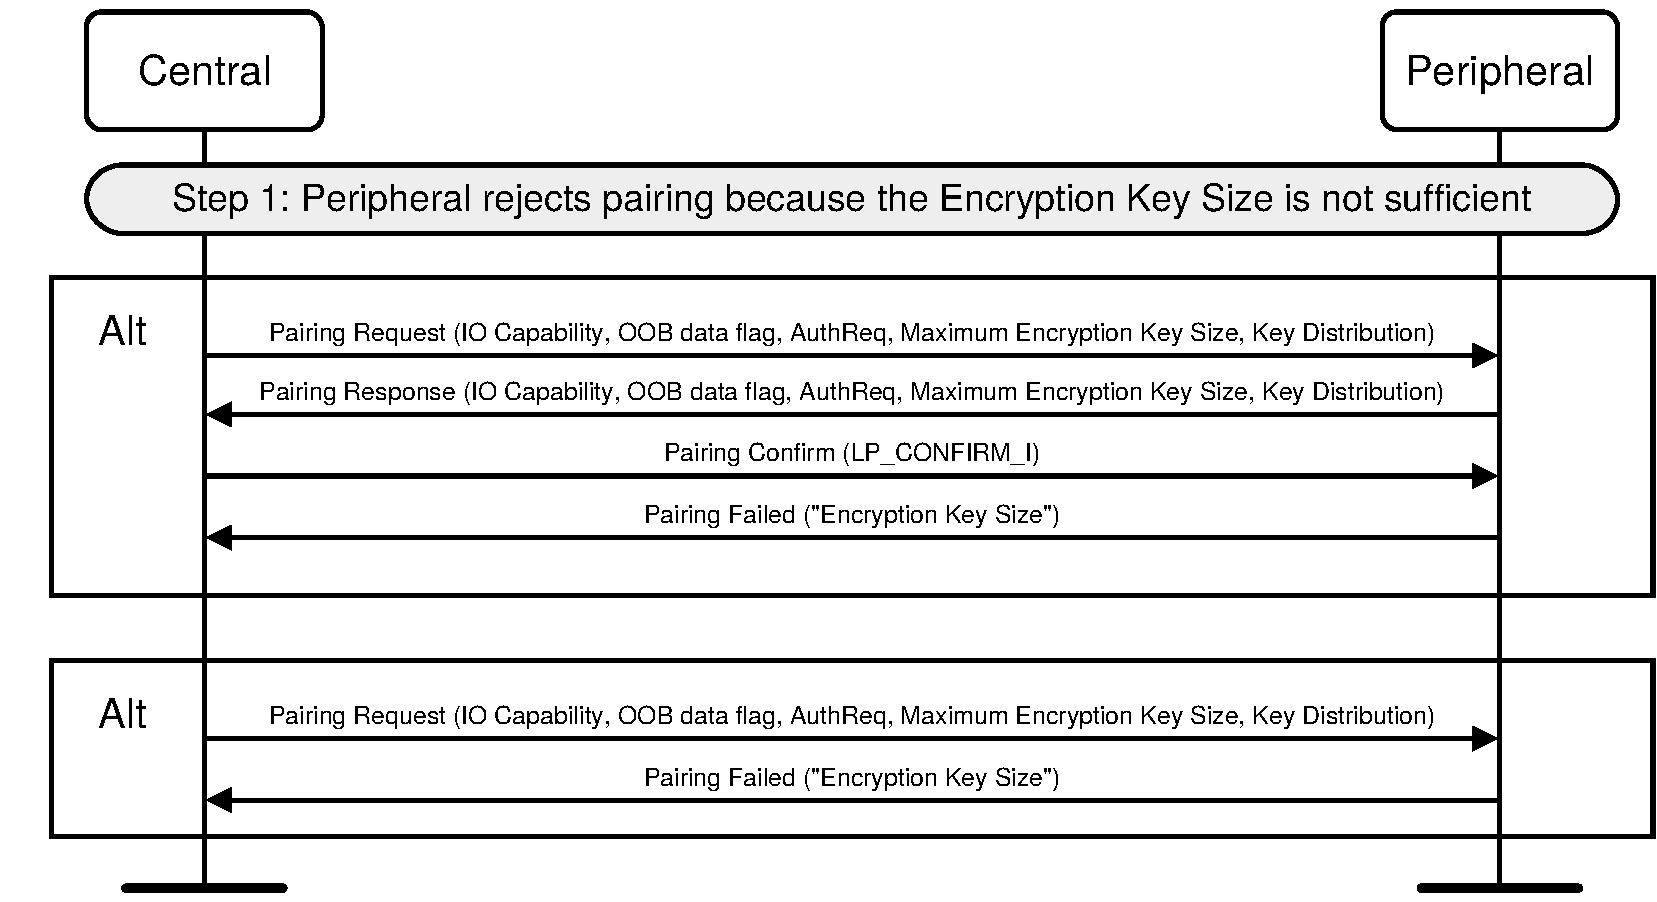 Peripheral rejects pairing because of key size